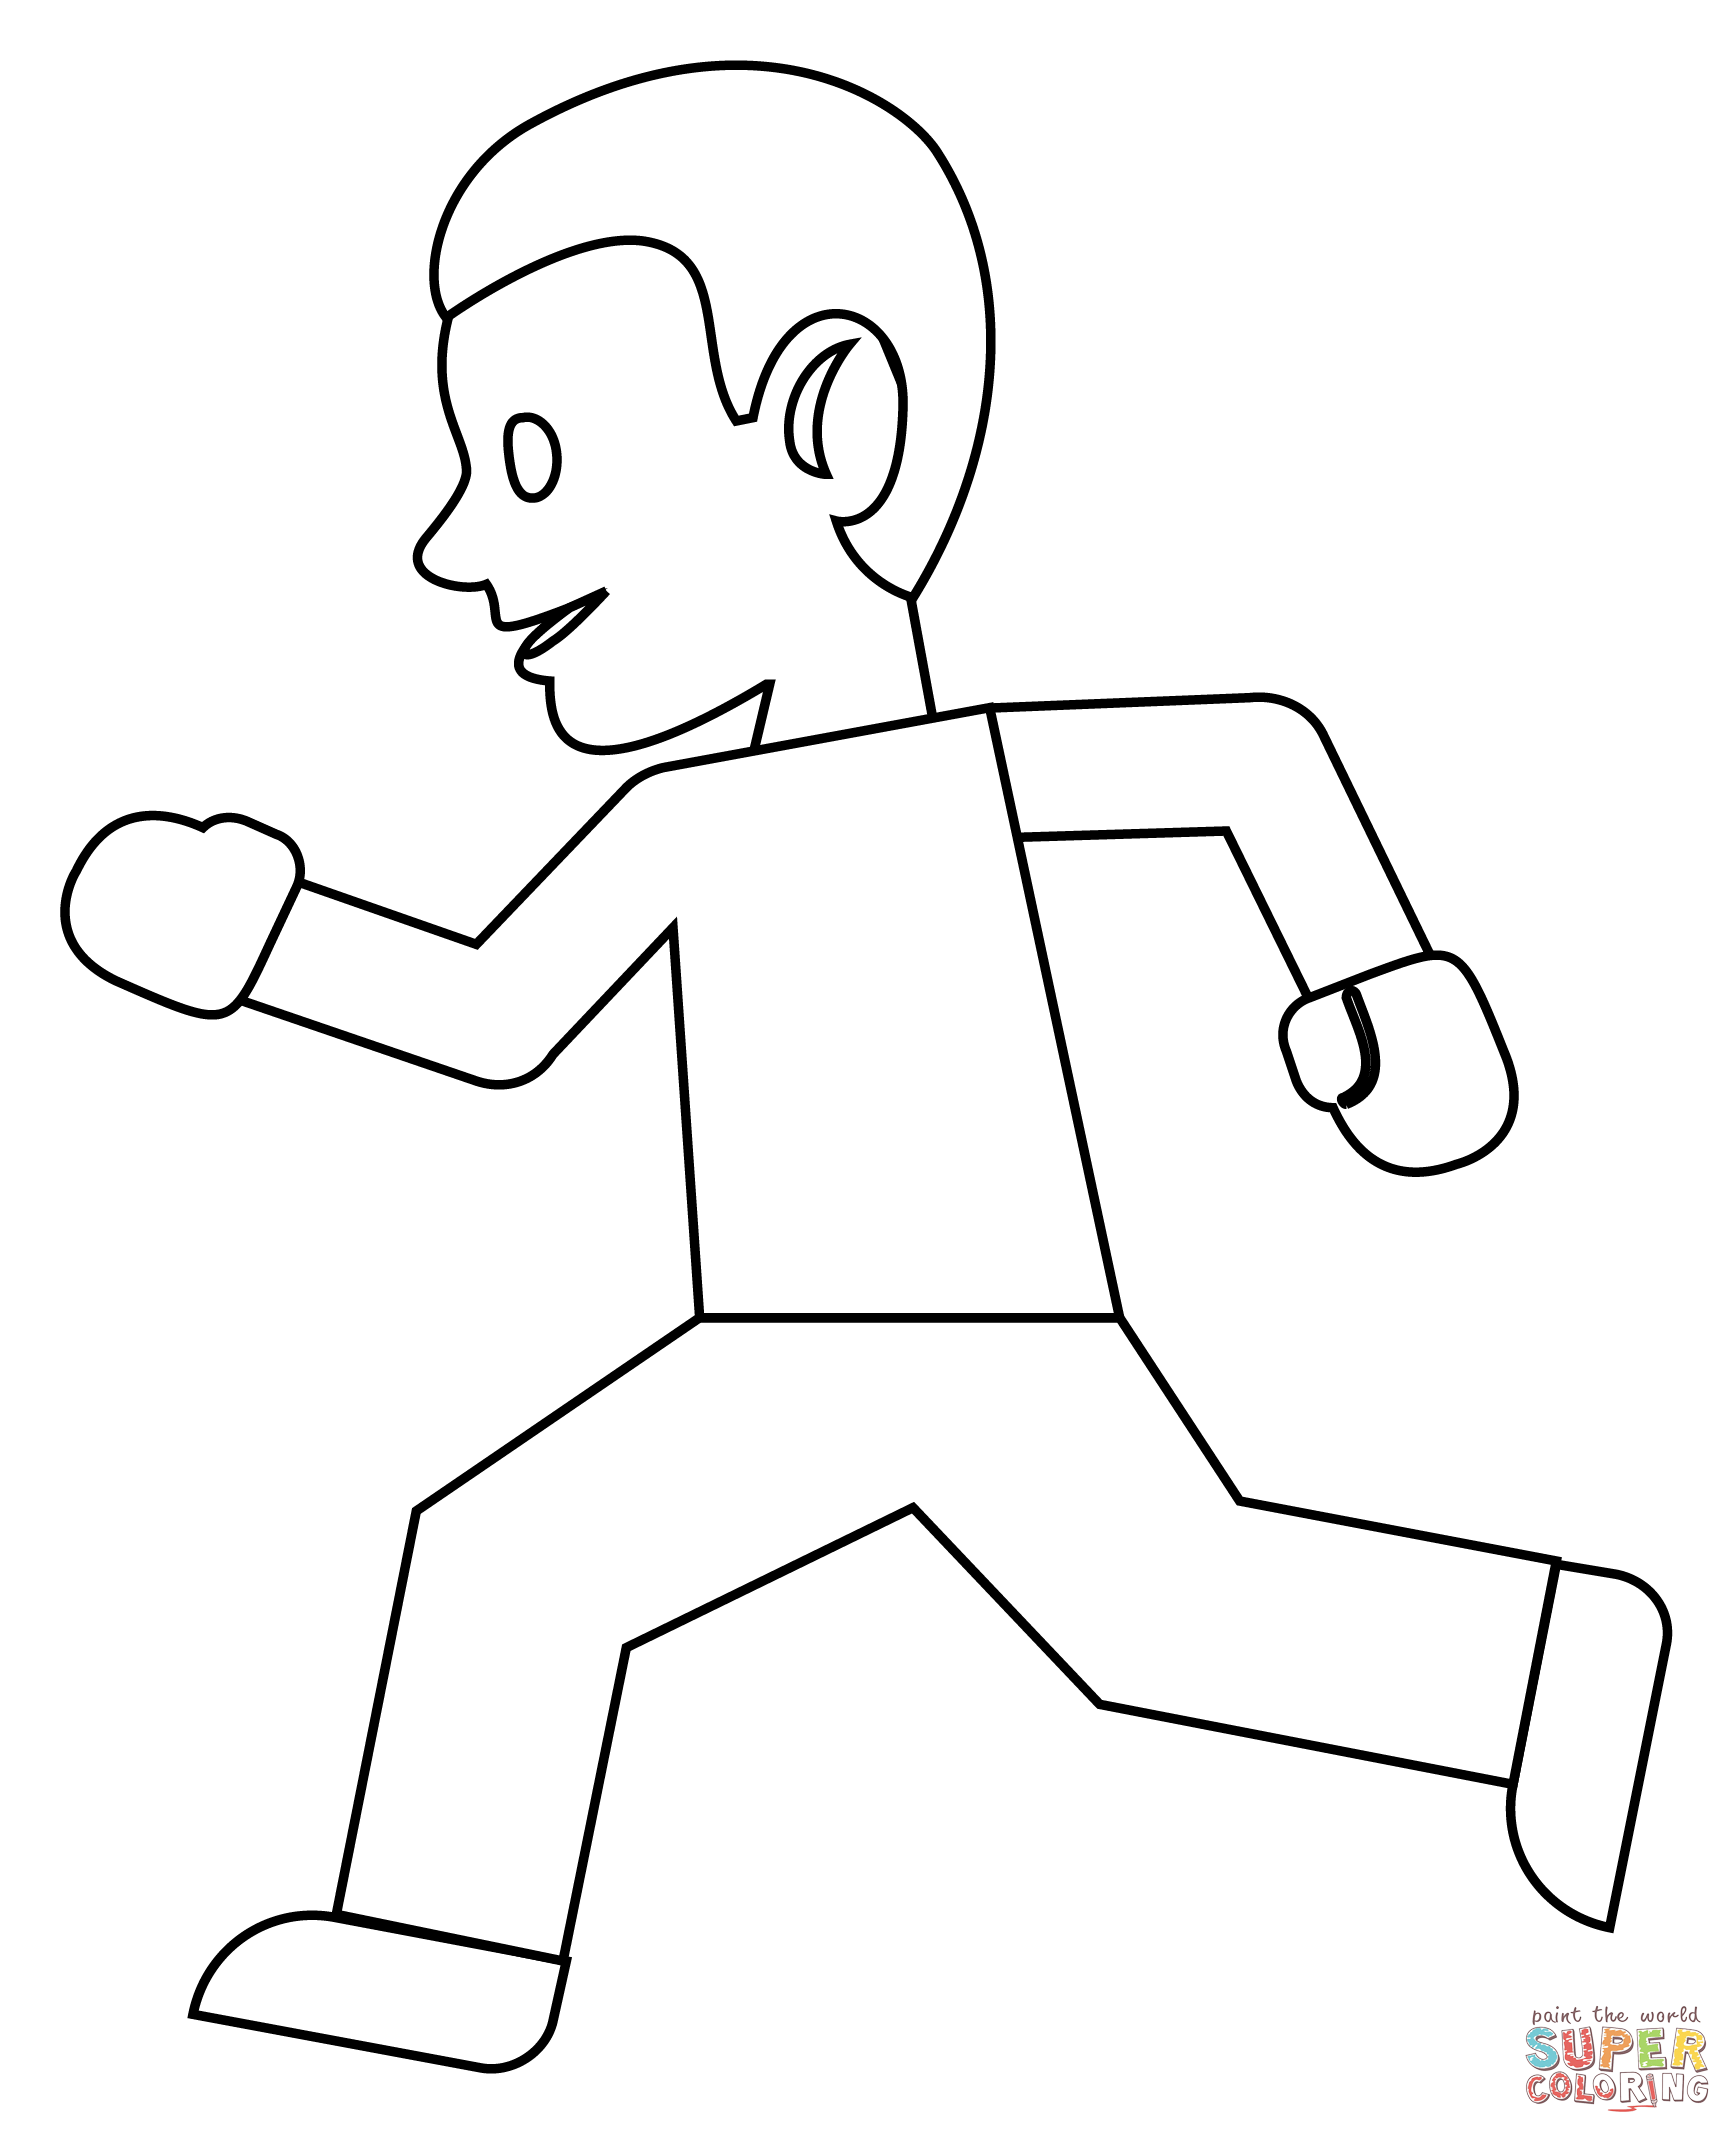 Person running coloring page free printable coloring pages